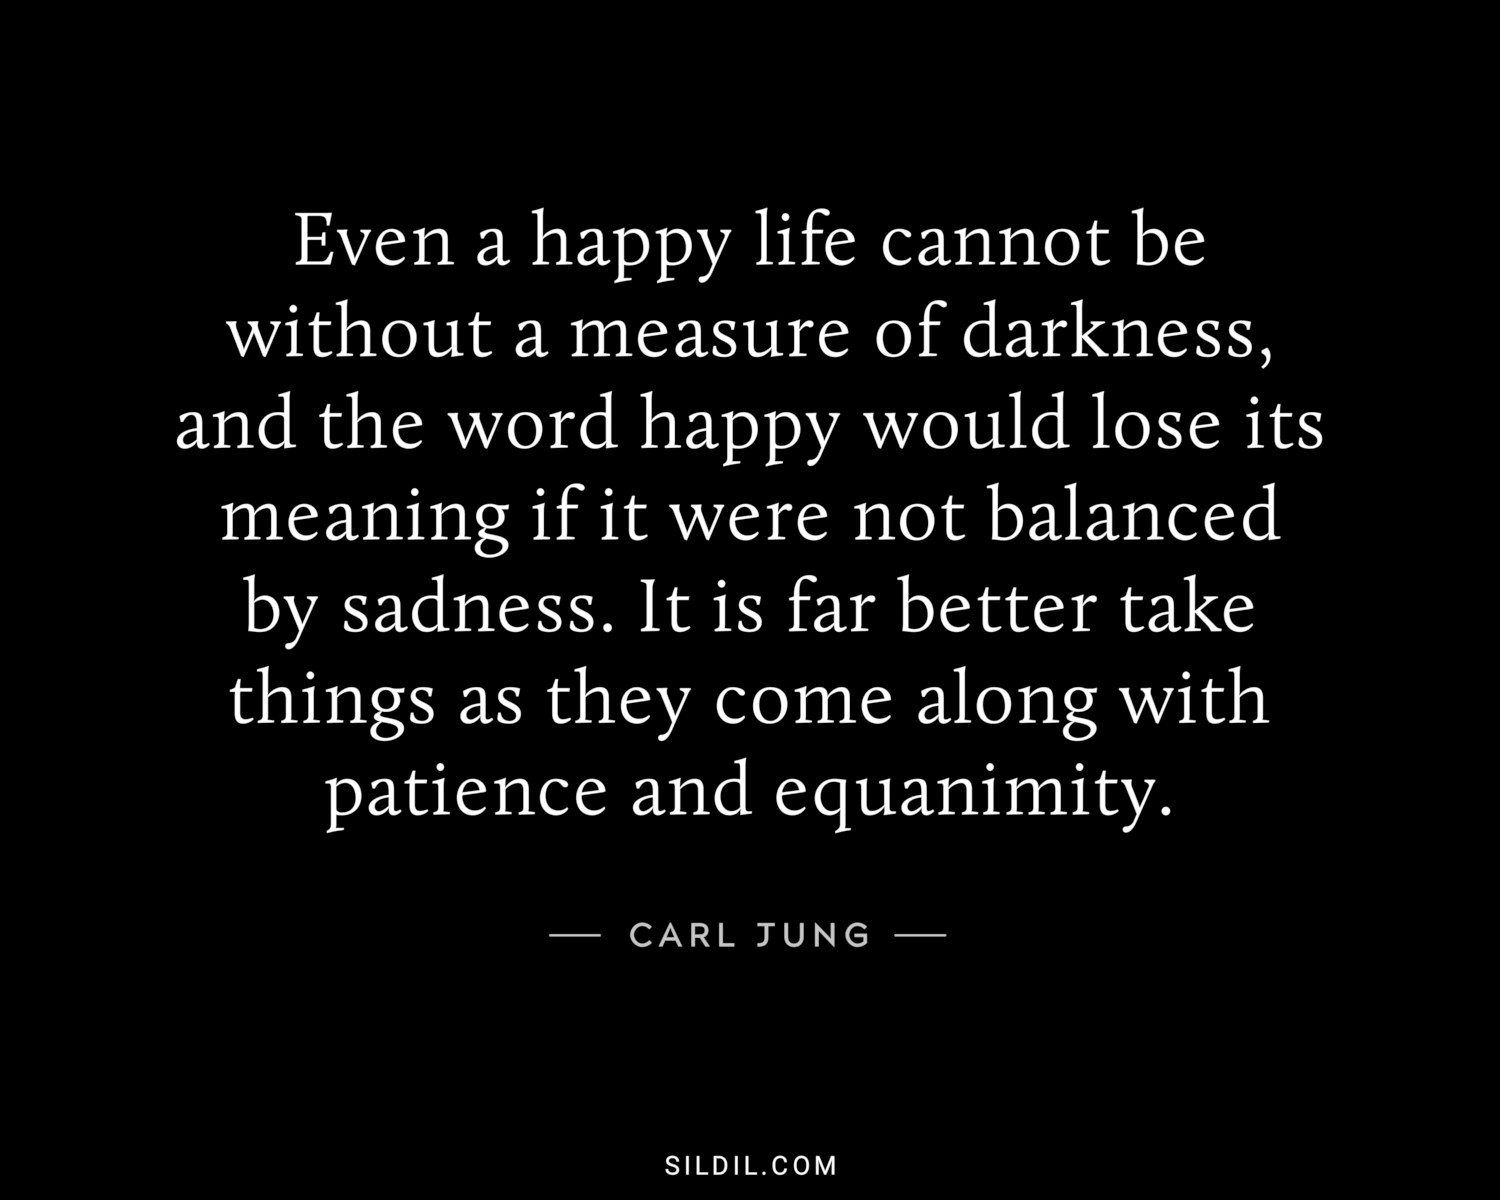 Even a happy life cannot be without a measure of darkness, and the word happy would lose its meaning if it were not balanced by sadness. It is far better take things as they come along with patience and equanimity.